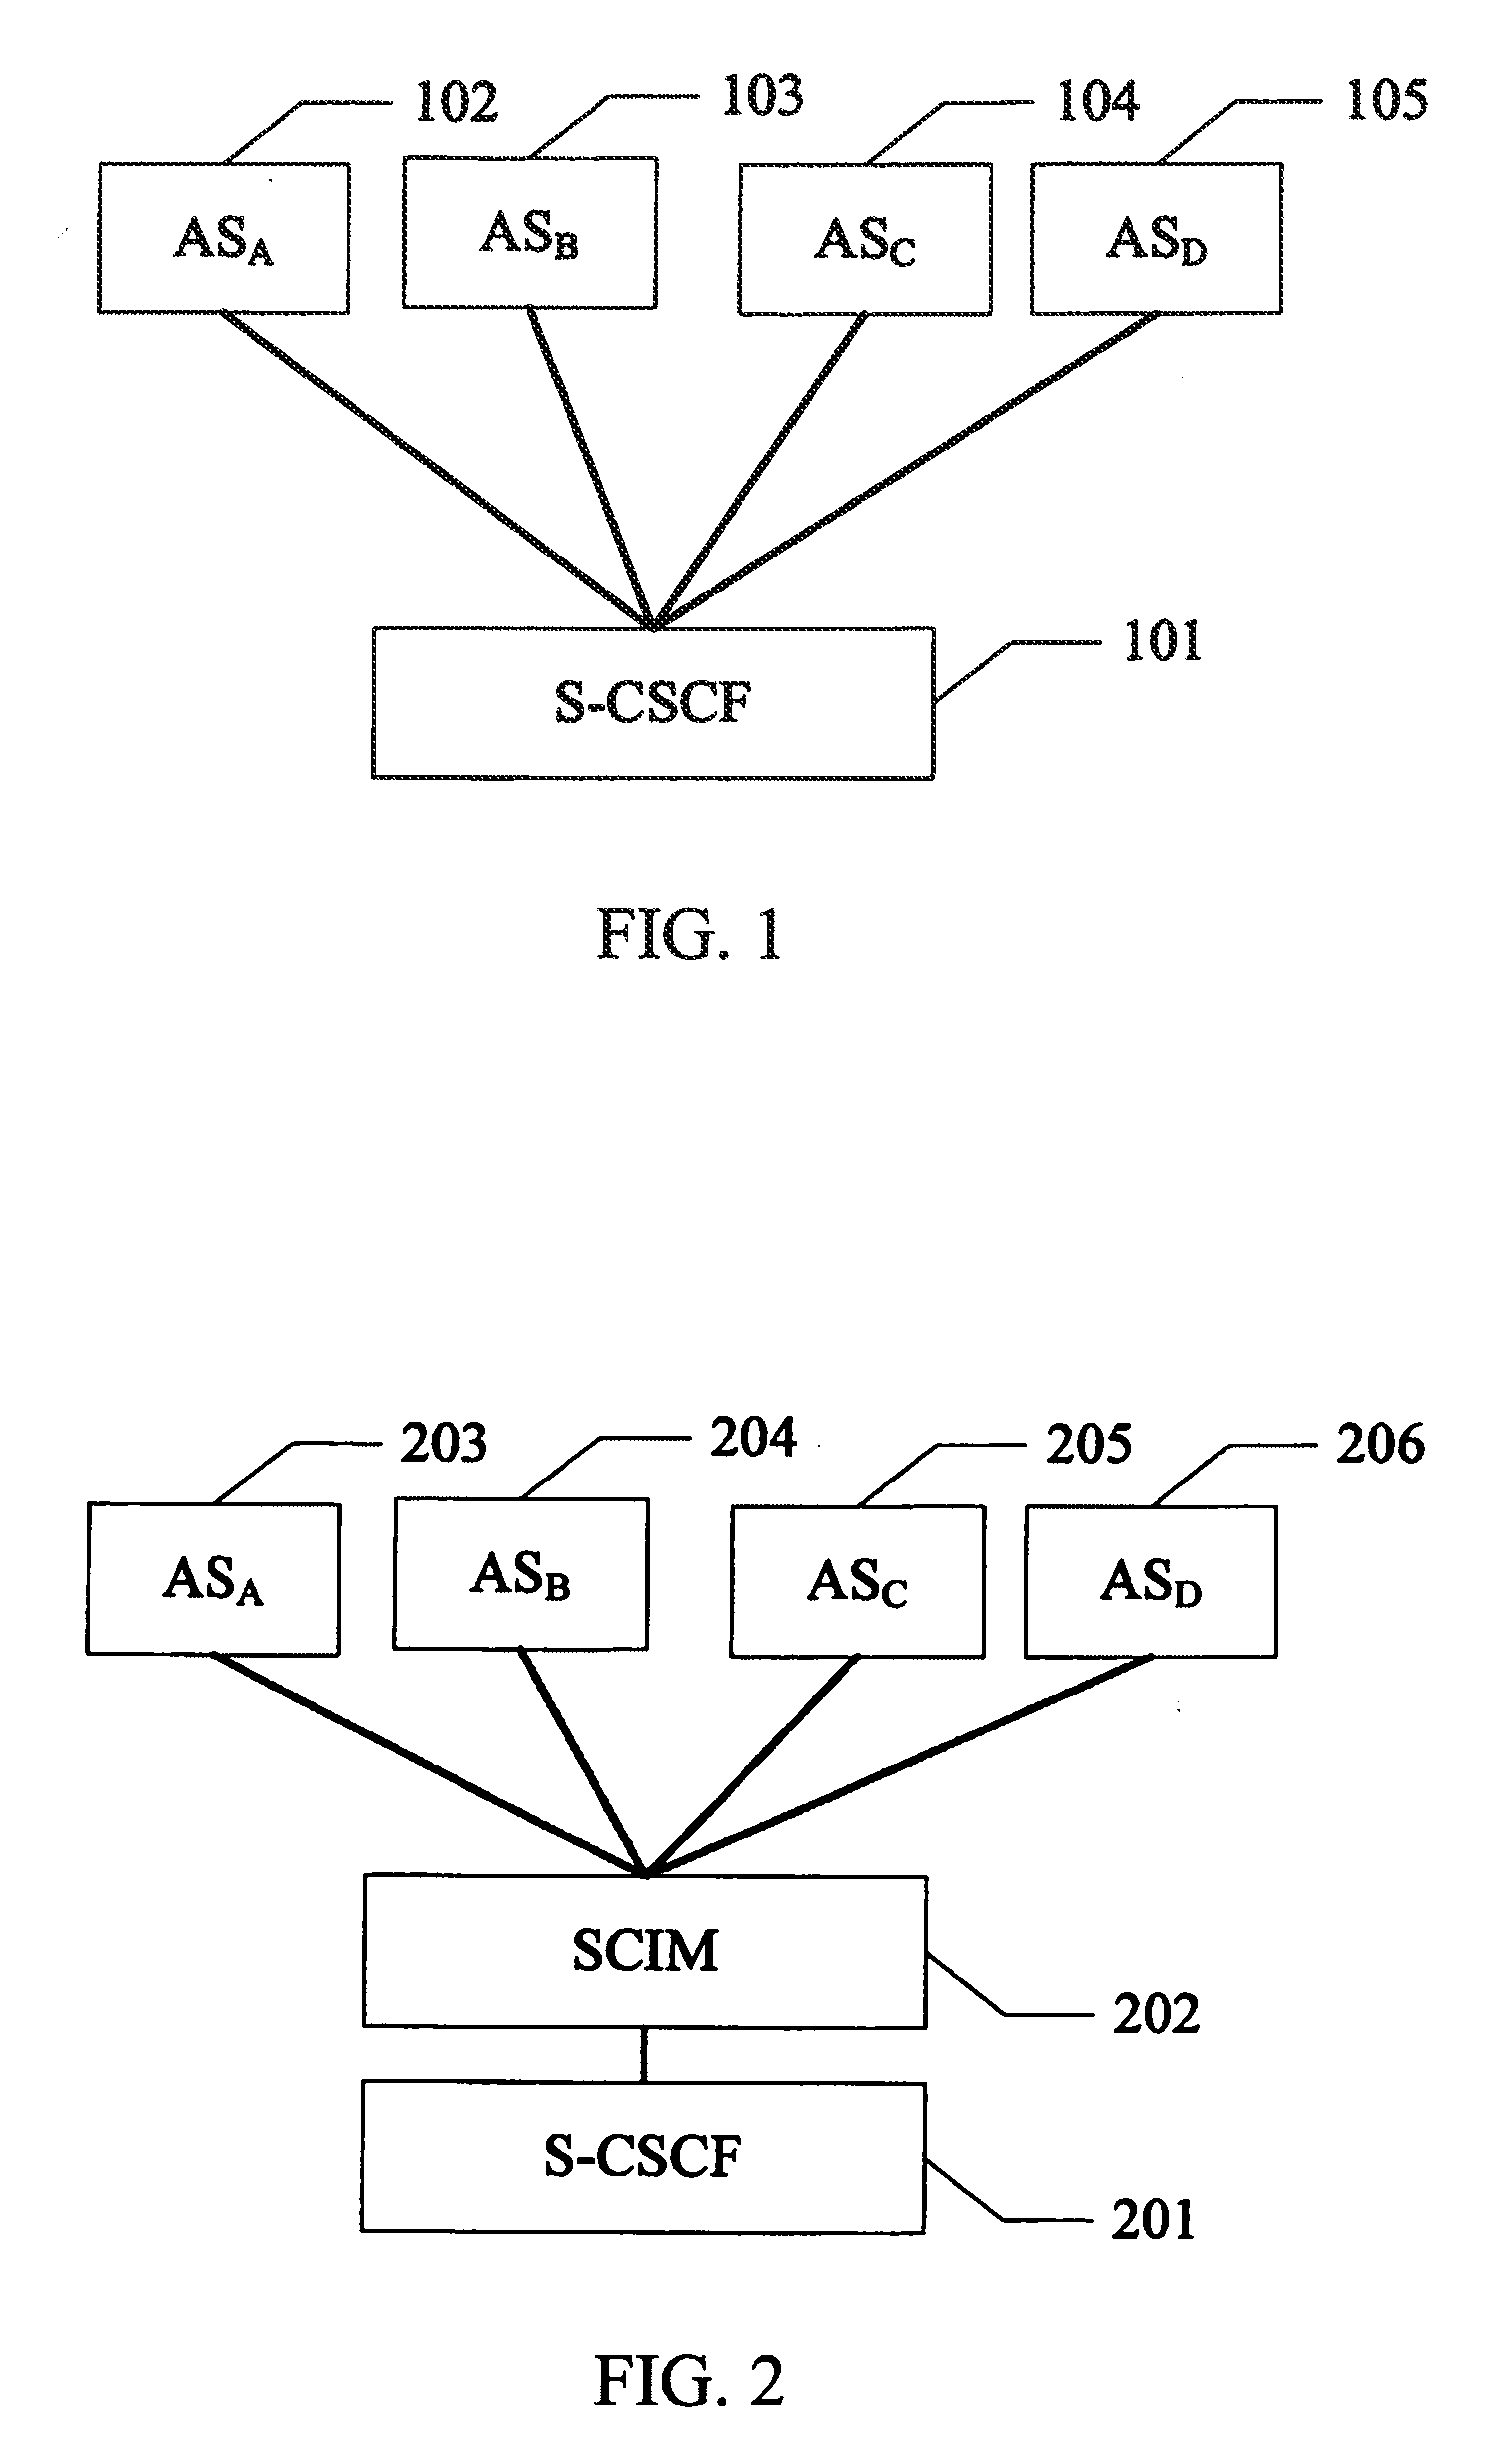 Method for implementing service interaction in the IP multimedia subsystem